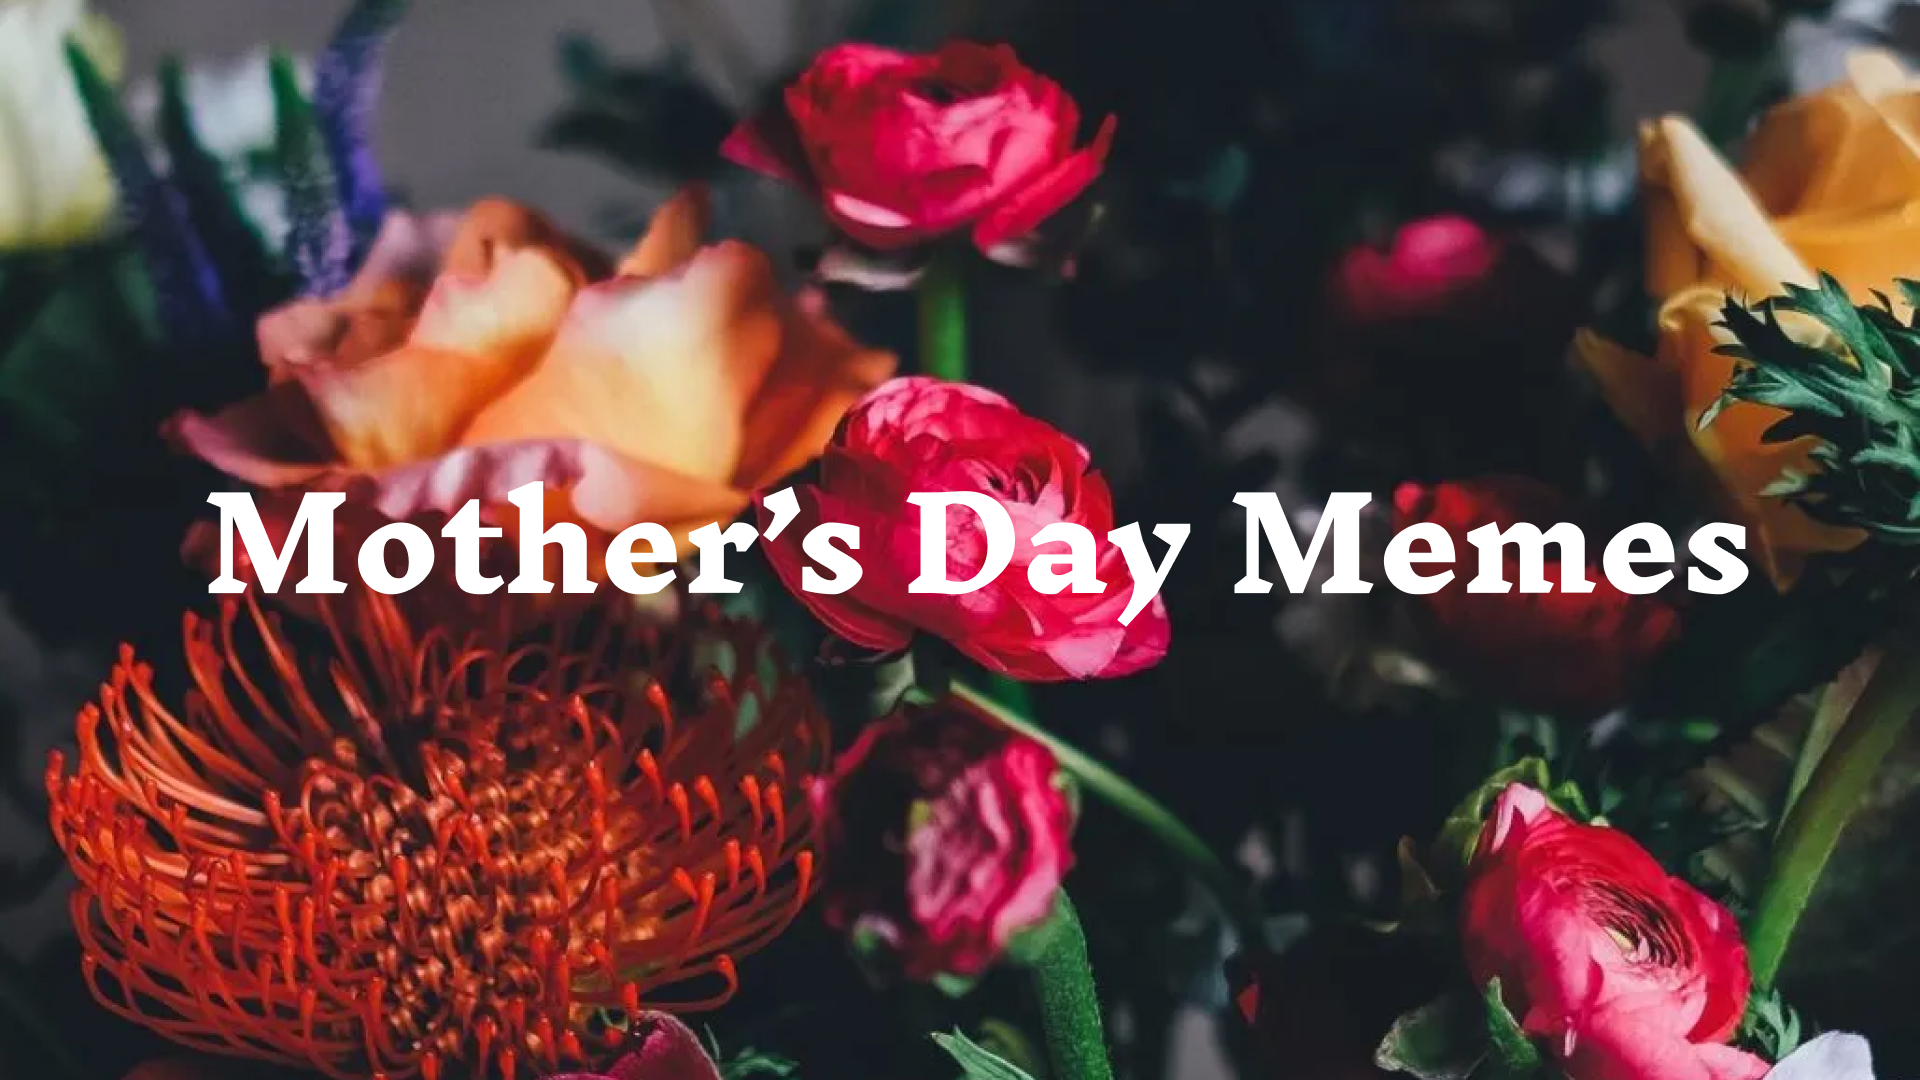 Explore 10 Sites to Find Mother's Day Memes Special for Her